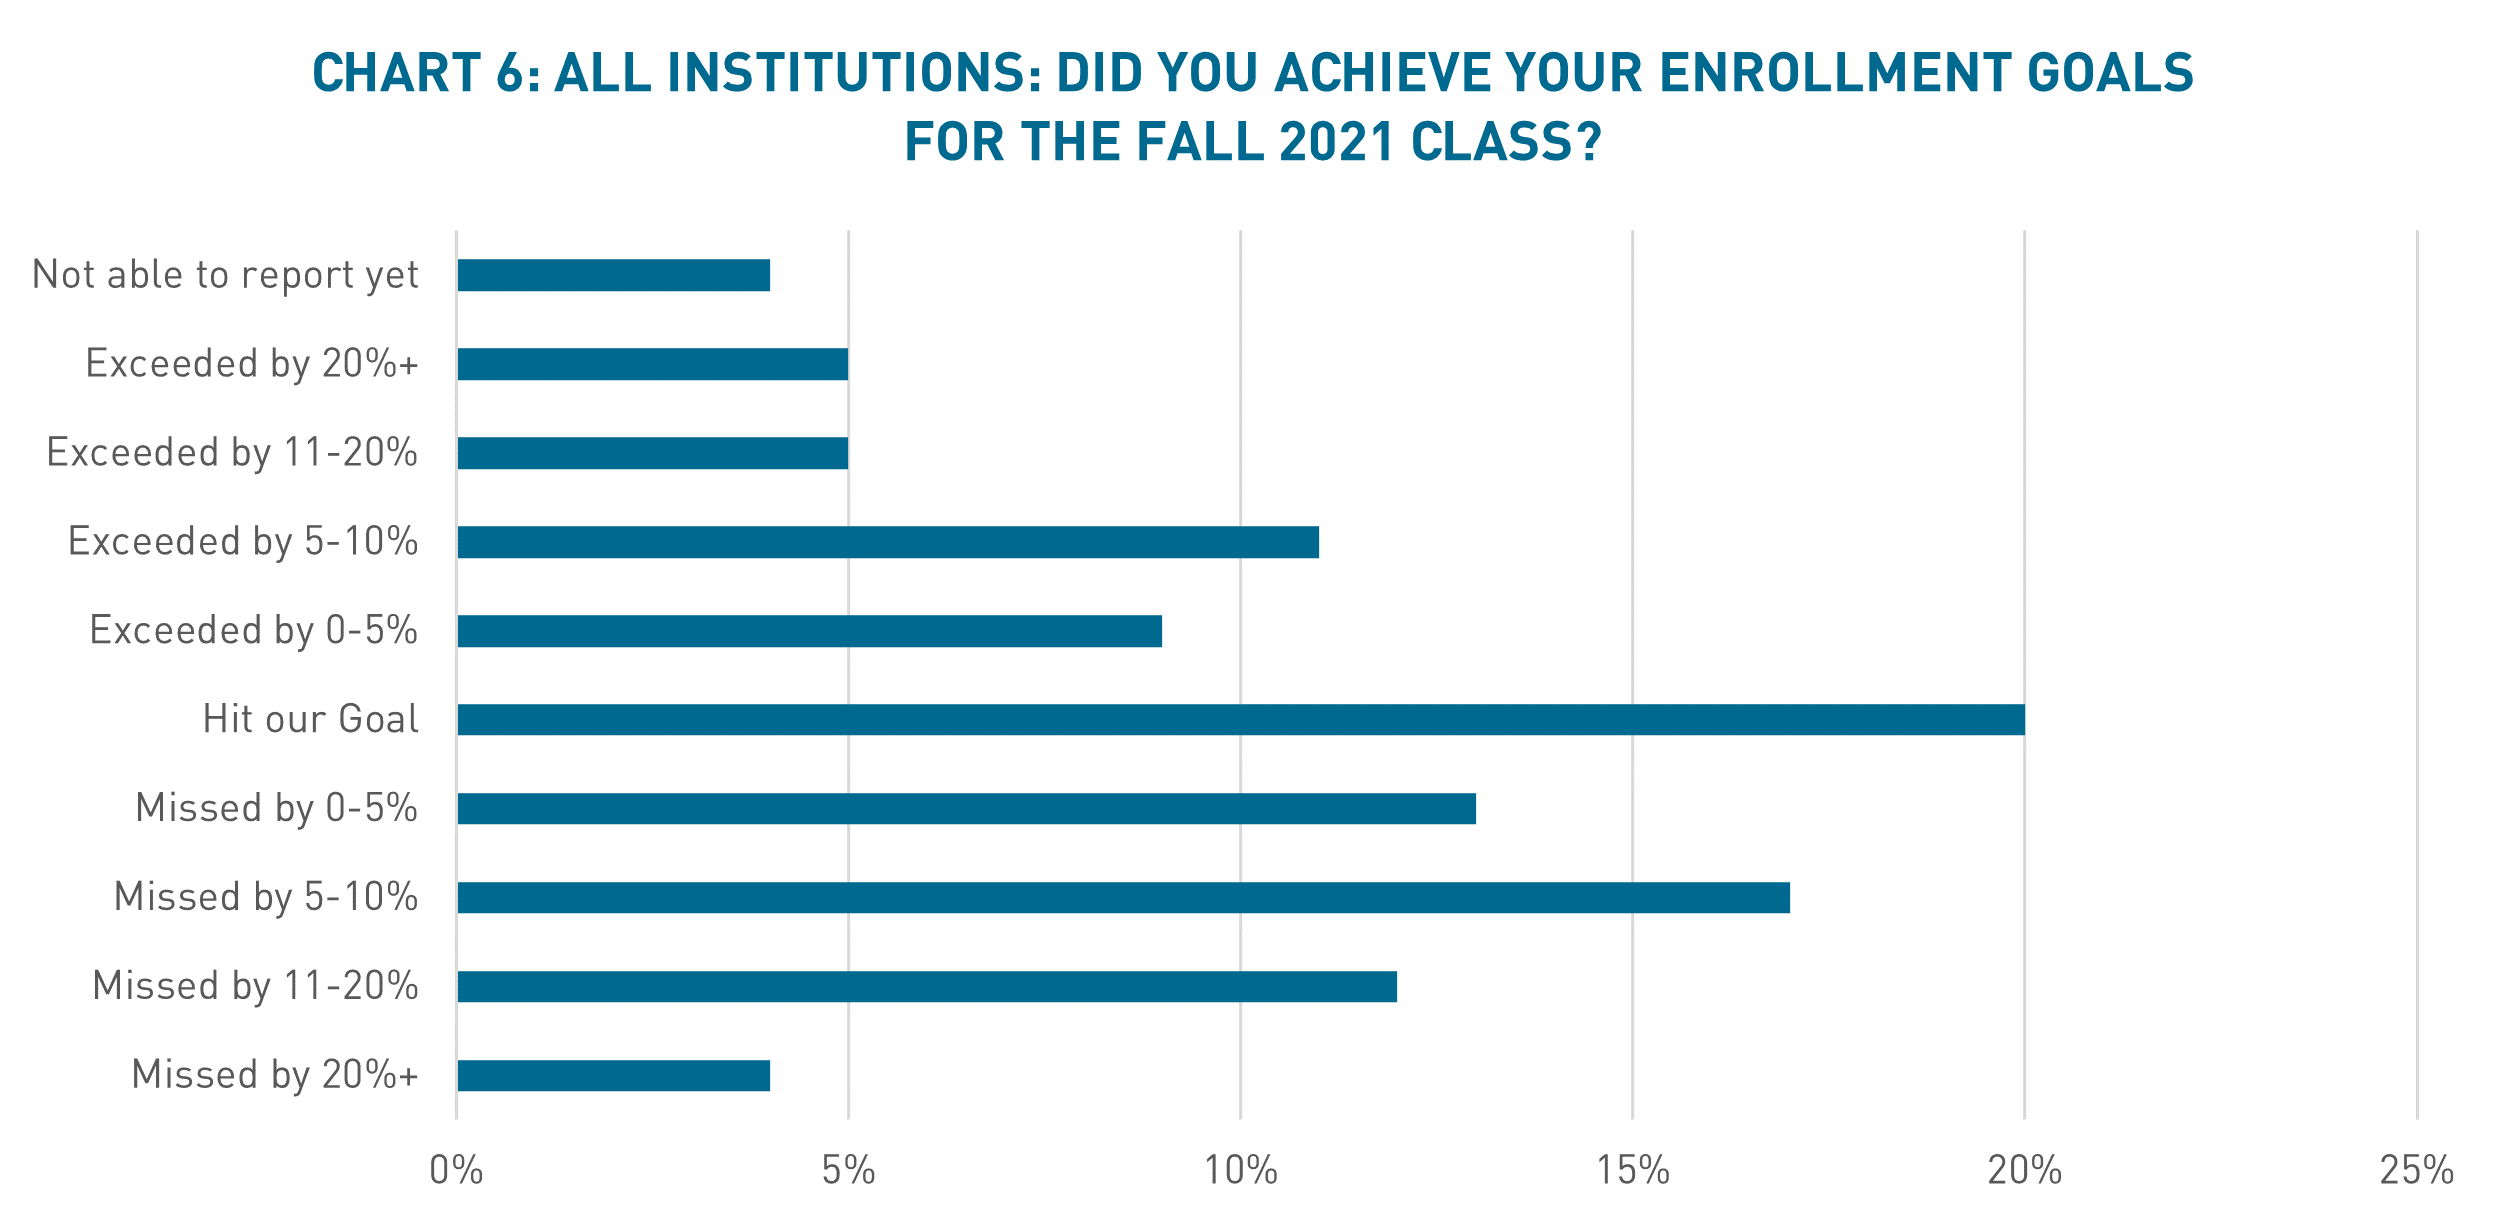 Chart shows colleges and their alignment with enrollment goals